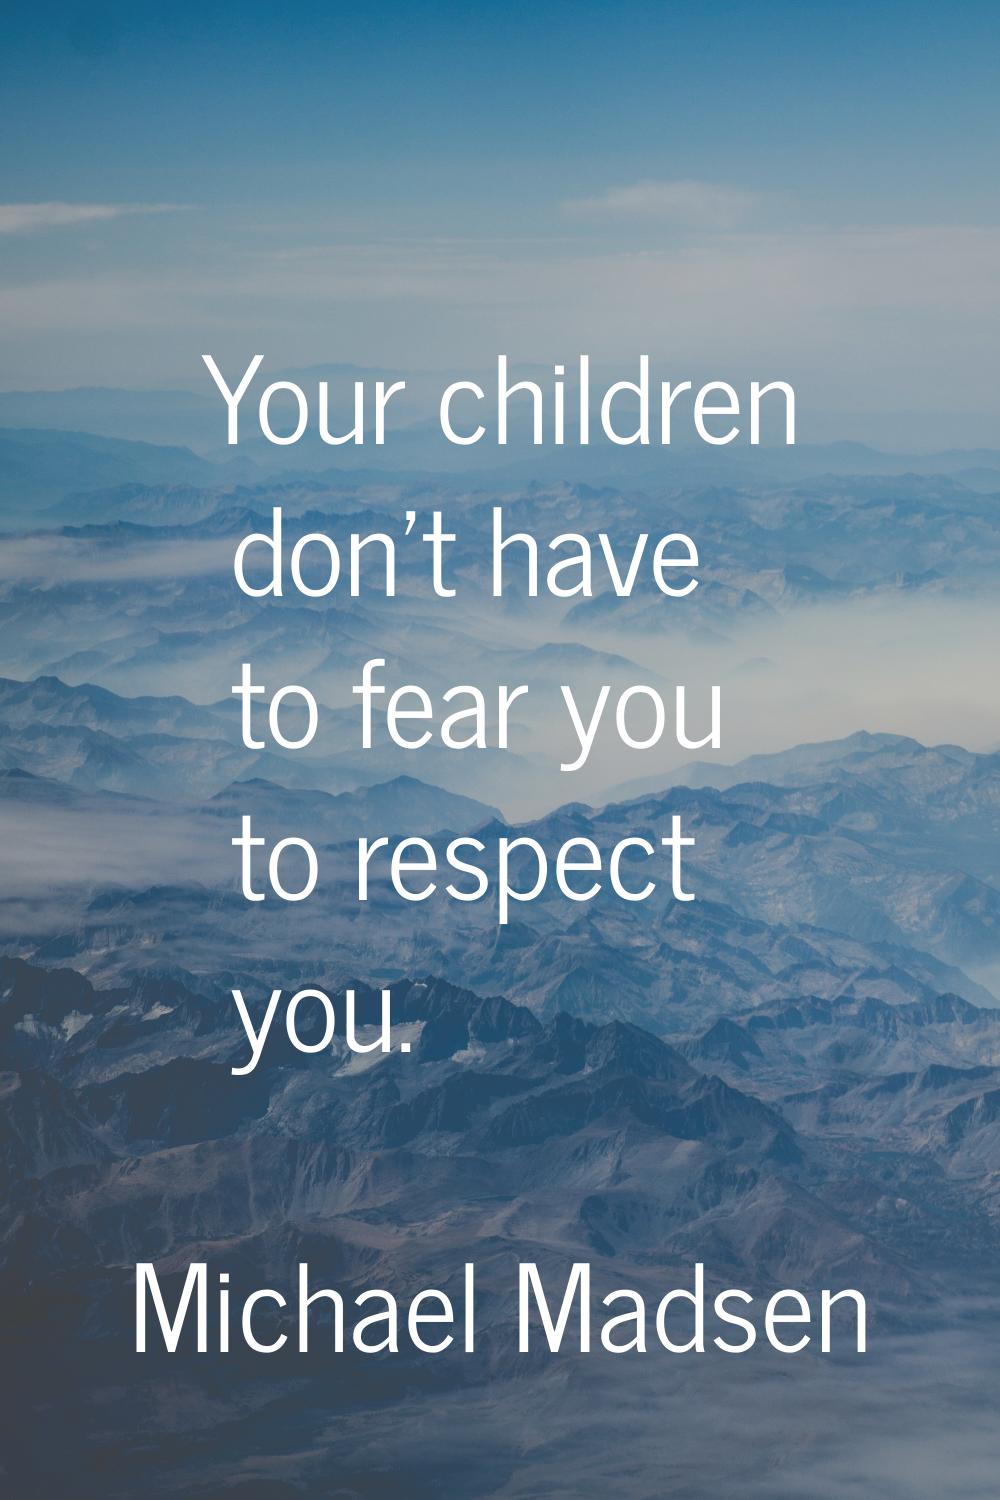 Your children don't have to fear you to respect you.